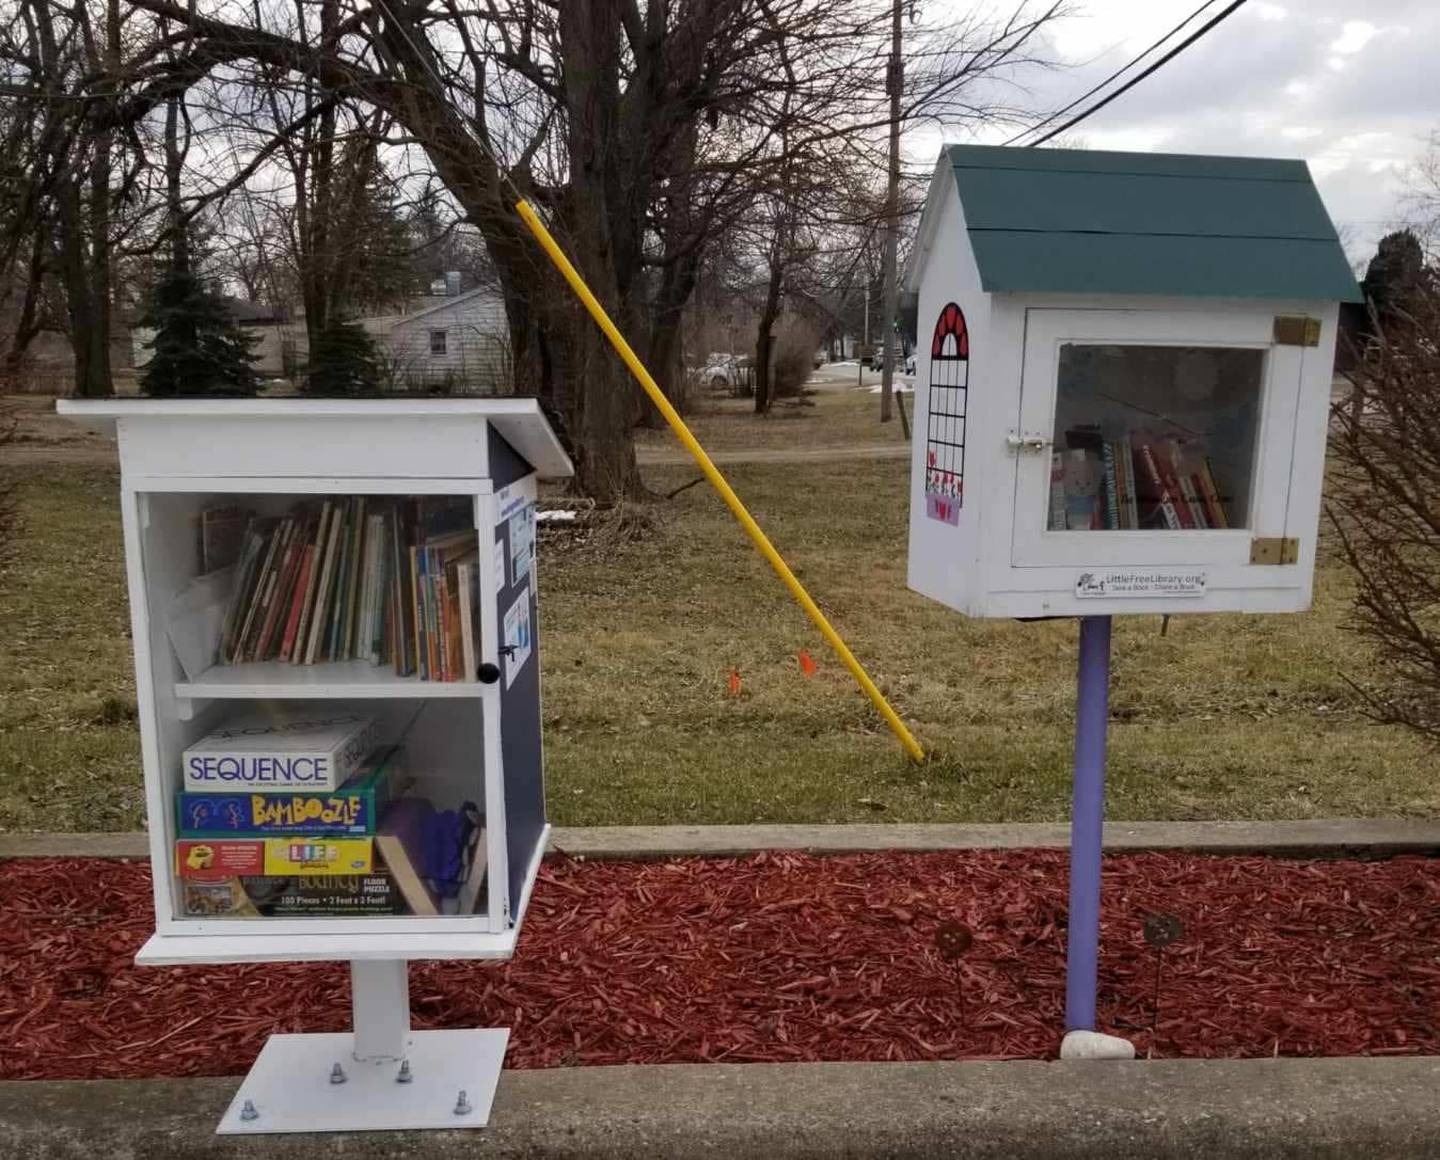 Our Caring Closet in Wilmington also has a Little Free Library.